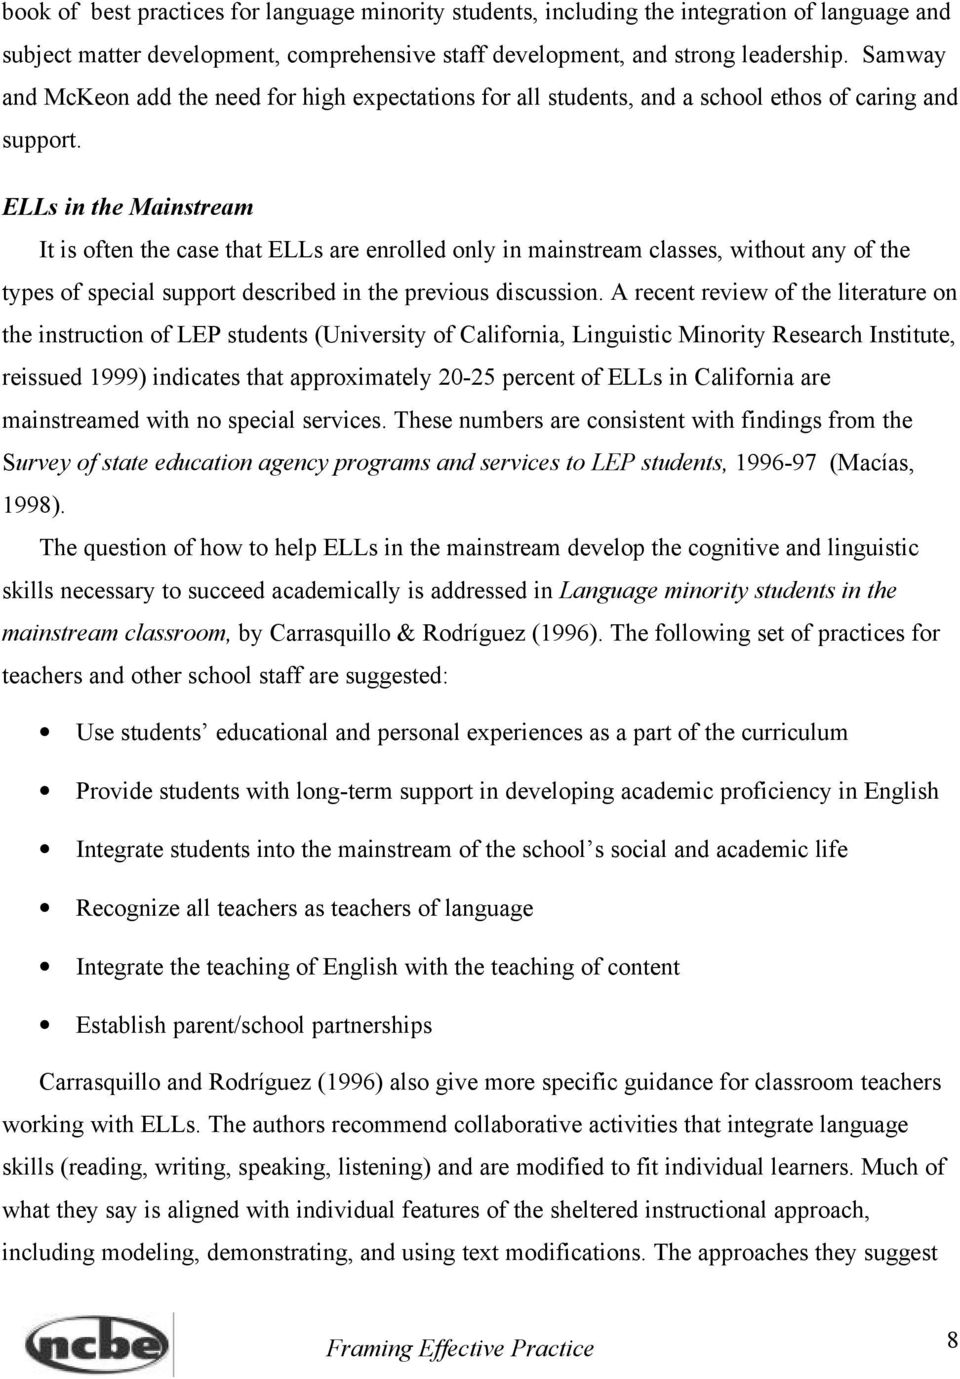 ELLs in the Mainstream It is often the case that ELLs are enrolled only in mainstream classes, without any of the types of special support described in the previous discussion.